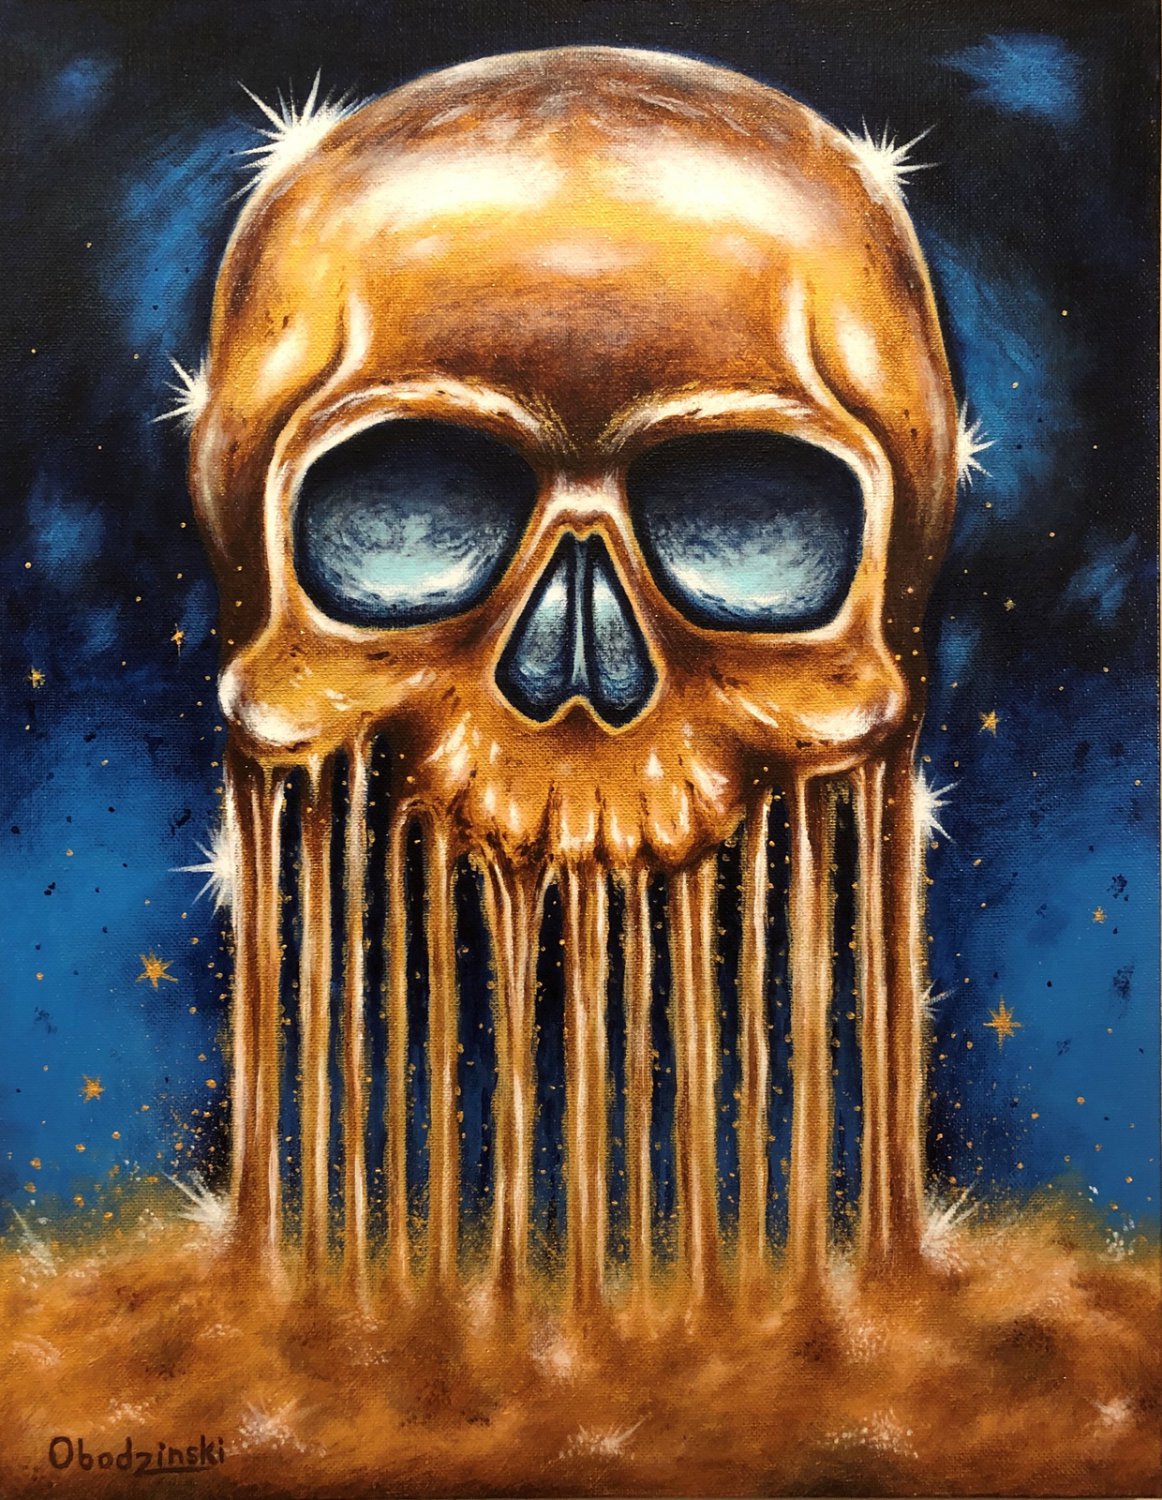 "All that Glitters is Gold" Skull Art Poster Print by Gregg's Deep Colors